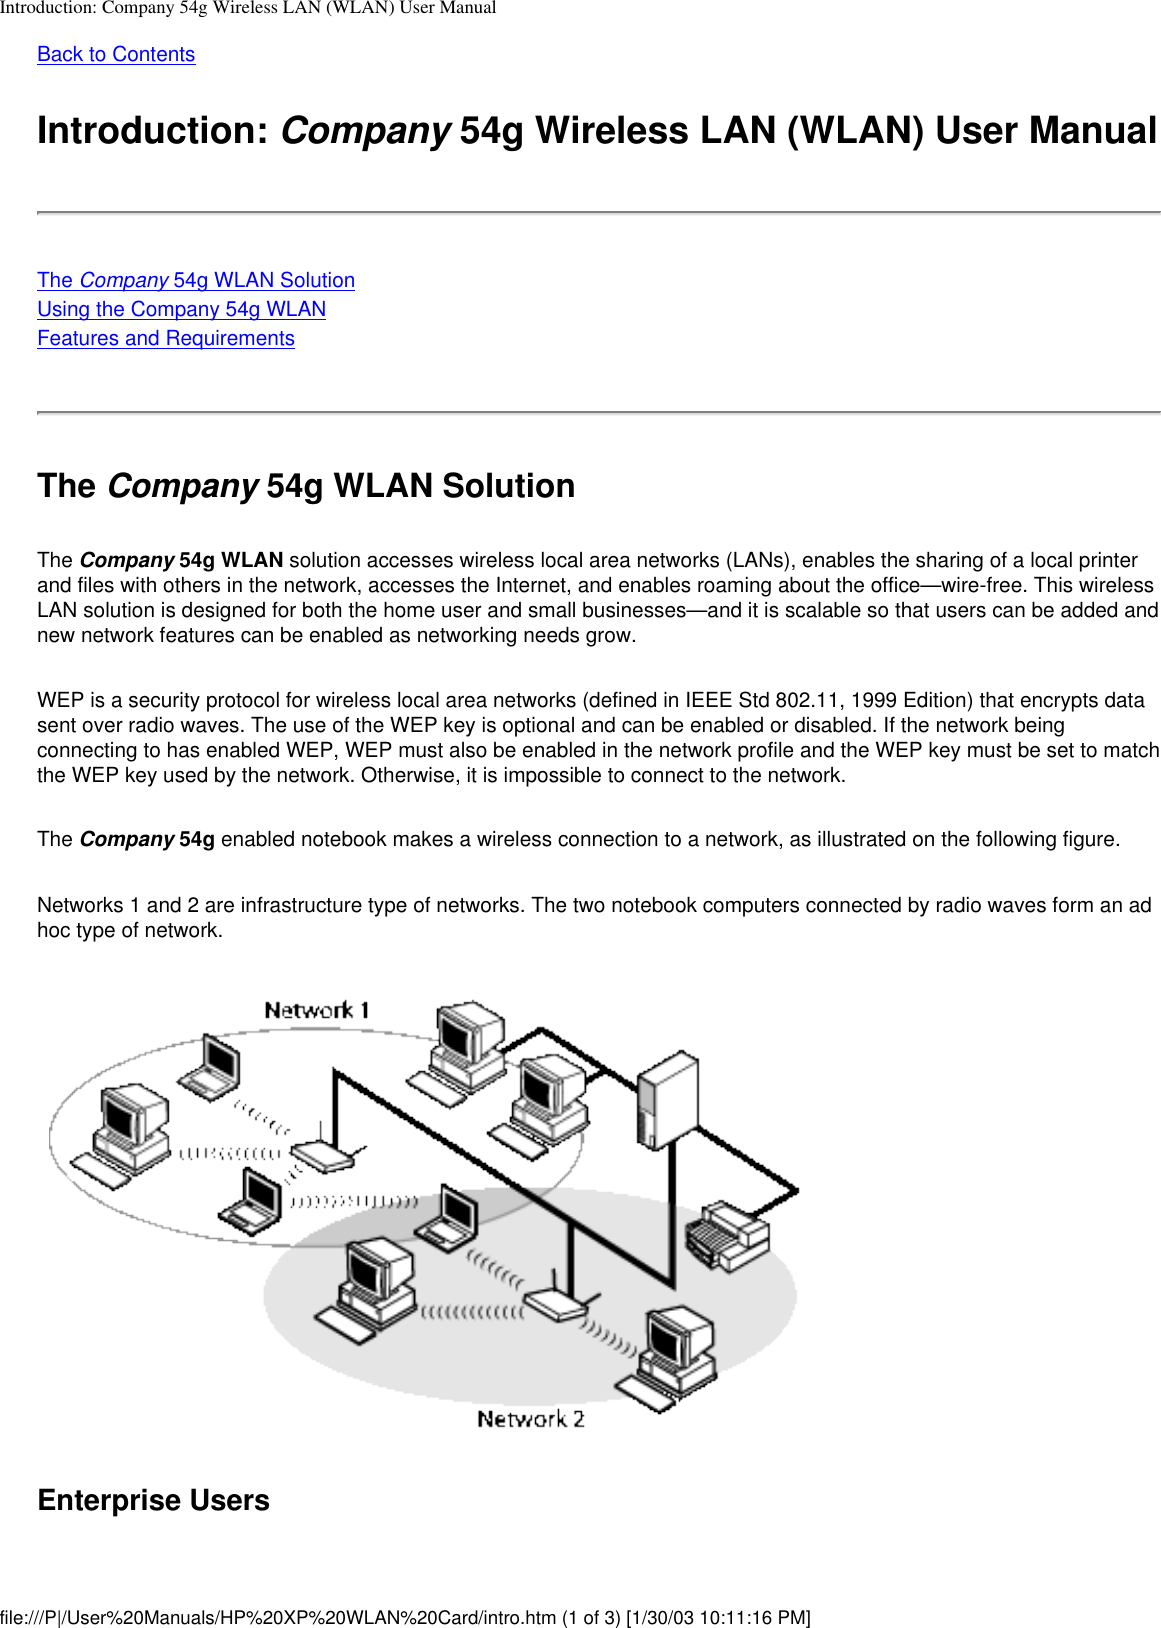 Introduction: Company 54g Wireless LAN (WLAN) User ManualBack to ContentsIntroduction: Company 54g Wireless LAN (WLAN) User ManualThe Company 54g WLAN SolutionUsing the Company 54g WLANFeatures and RequirementsThe Company 54g WLAN SolutionThe Company 54g WLAN solution accesses wireless local area networks (LANs), enables the sharing of a local printer and files with others in the network, accesses the Internet, and enables roaming about the office—wire-free. This wireless LAN solution is designed for both the home user and small businesses—and it is scalable so that users can be added and new network features can be enabled as networking needs grow.WEP is a security protocol for wireless local area networks (defined in IEEE Std 802.11, 1999 Edition) that encrypts data sent over radio waves. The use of the WEP key is optional and can be enabled or disabled. If the network being connecting to has enabled WEP, WEP must also be enabled in the network profile and the WEP key must be set to match the WEP key used by the network. Otherwise, it is impossible to connect to the network.The Company 54g enabled notebook makes a wireless connection to a network, as illustrated on the following figure.Networks 1 and 2 are infrastructure type of networks. The two notebook computers connected by radio waves form an ad hoc type of network.Enterprise Usersfile:///P|/User%20Manuals/HP%20XP%20WLAN%20Card/intro.htm (1 of 3) [1/30/03 10:11:16 PM]